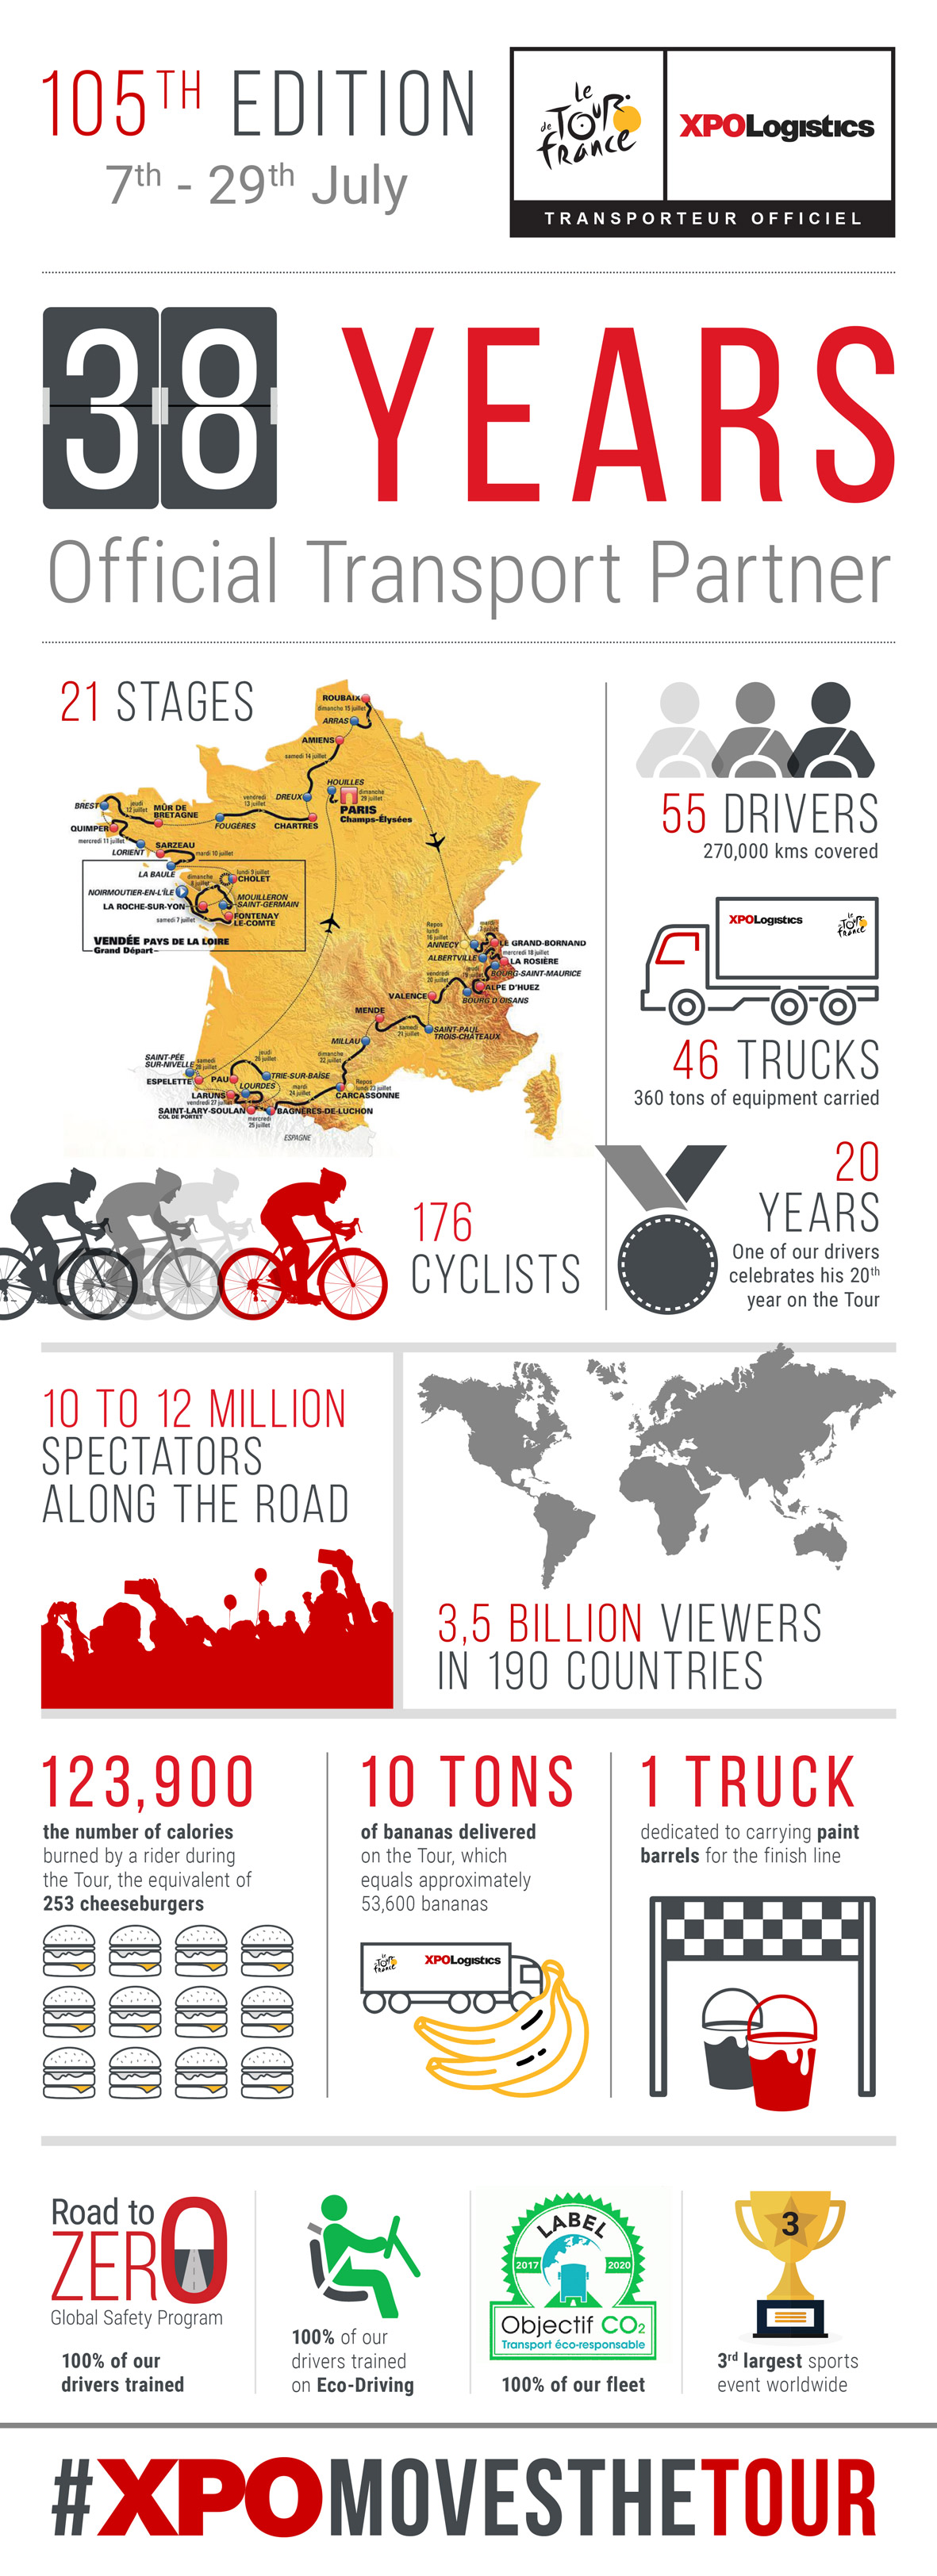 Behind our partnership with the Tour de France